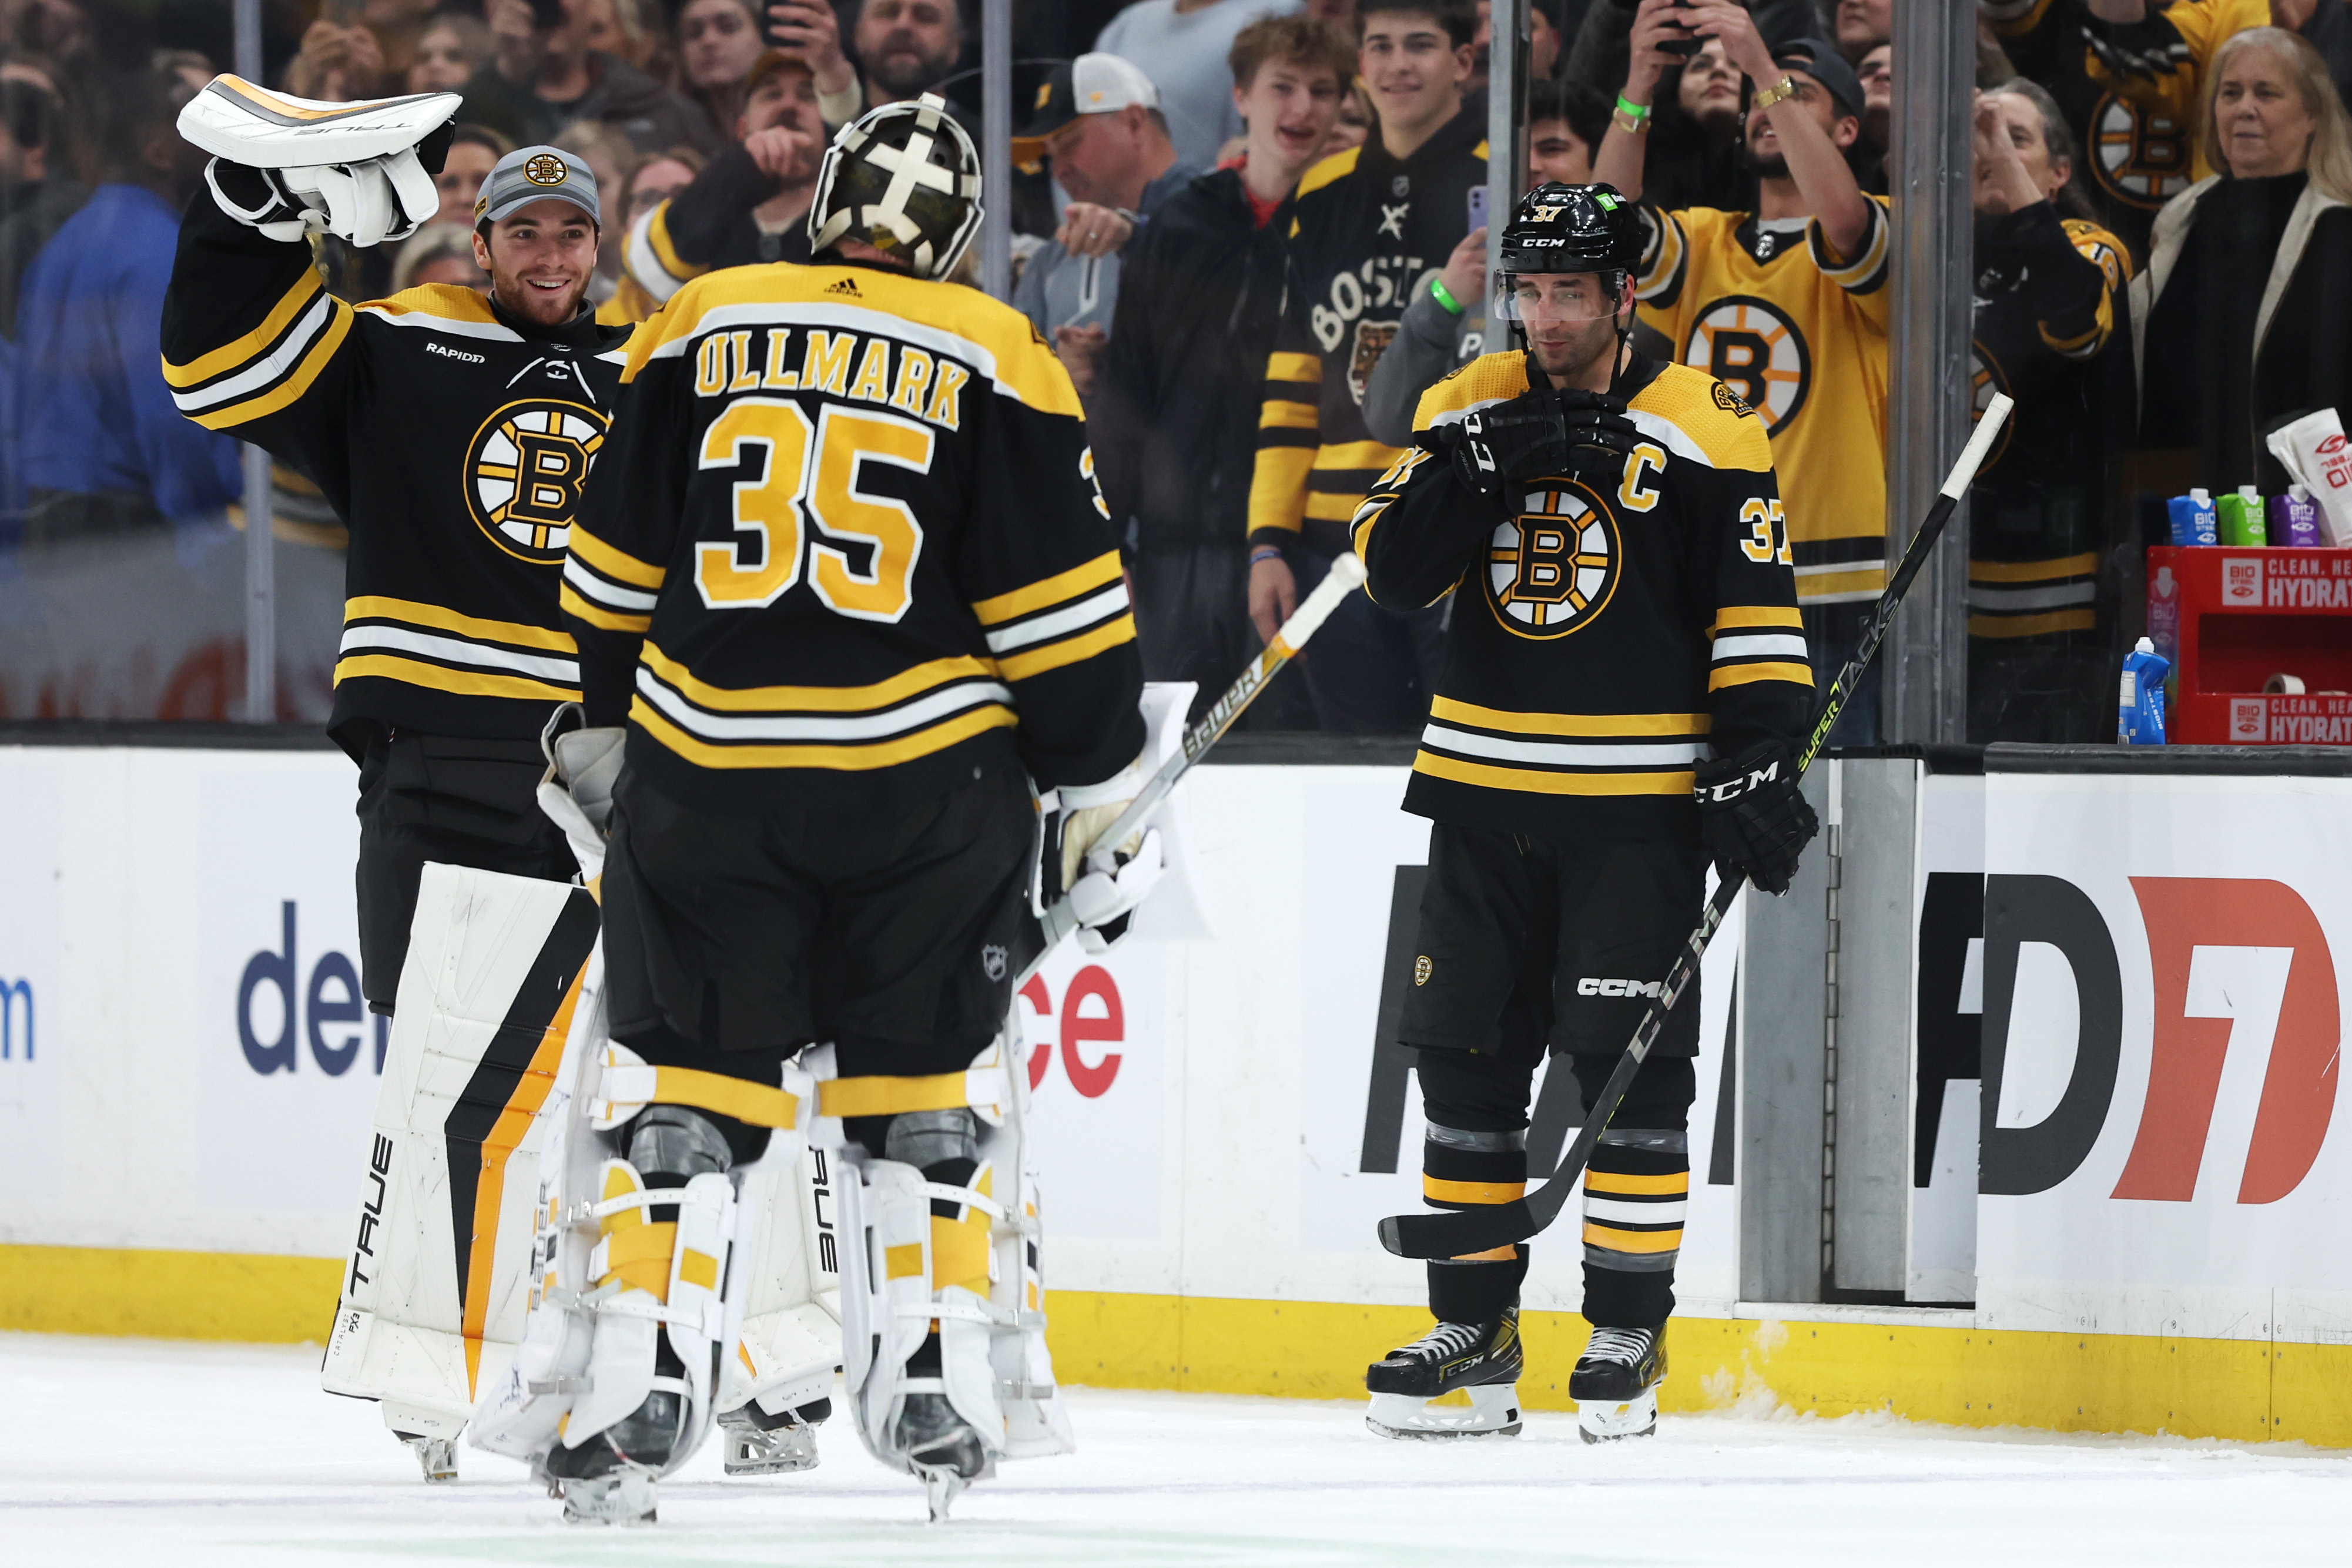 Burdge: There's Still Value in Betting on the Bruins to Win the Stanley Cup